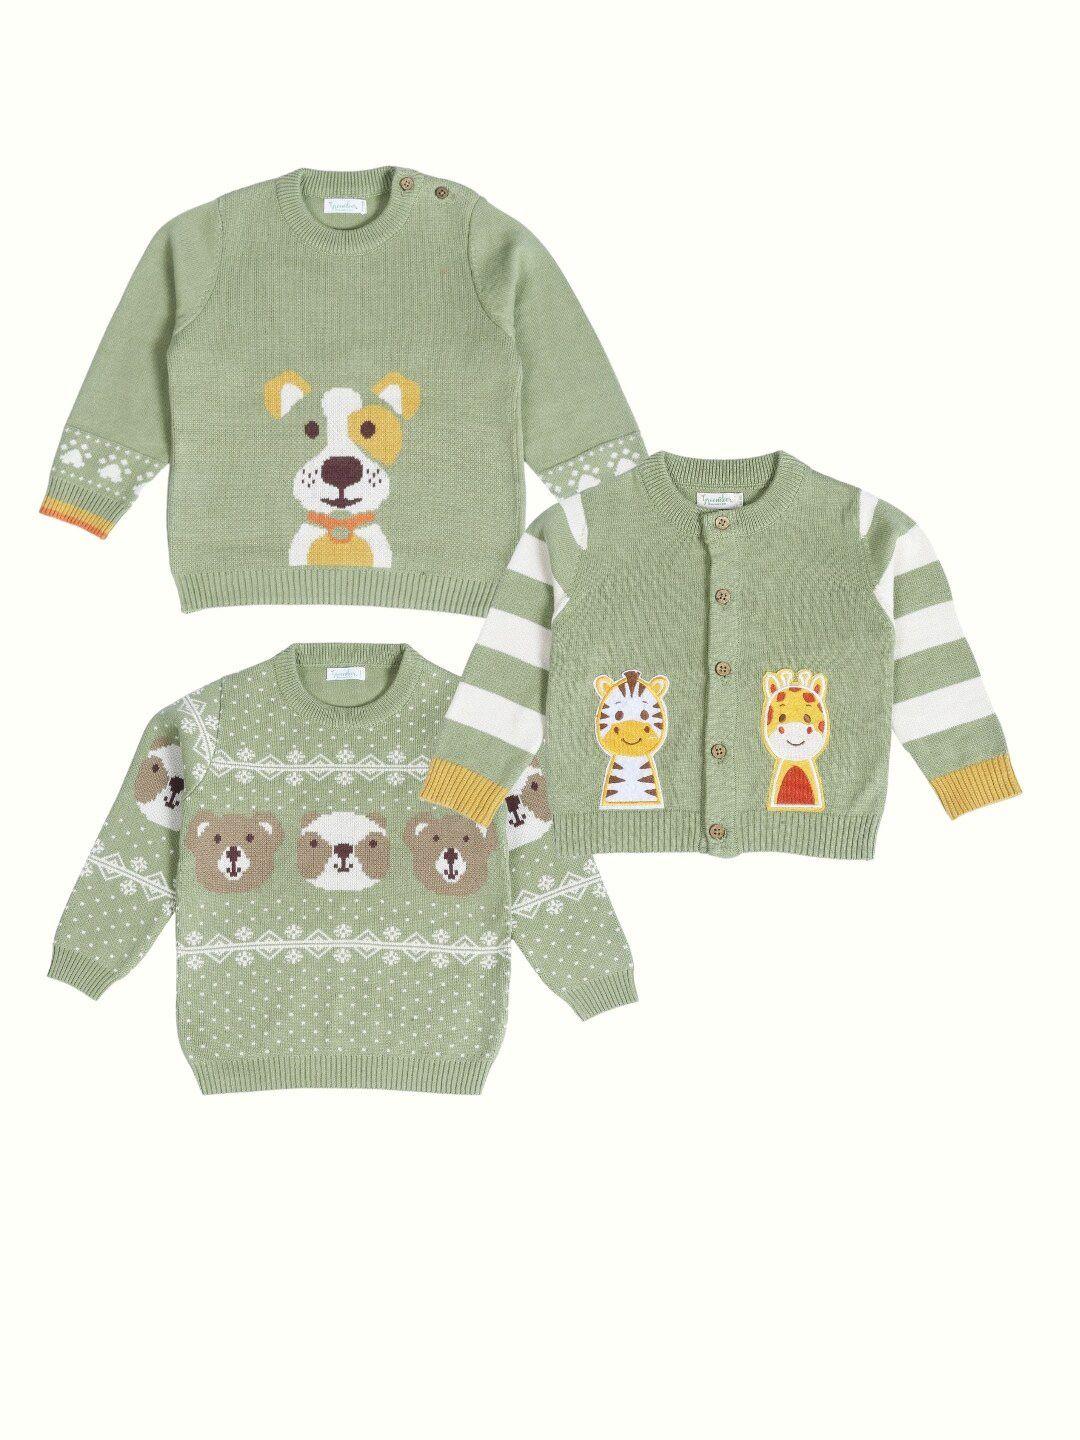 greendeer-kids-pack-of-3-graphic-printed-pure-cotton-sweaters